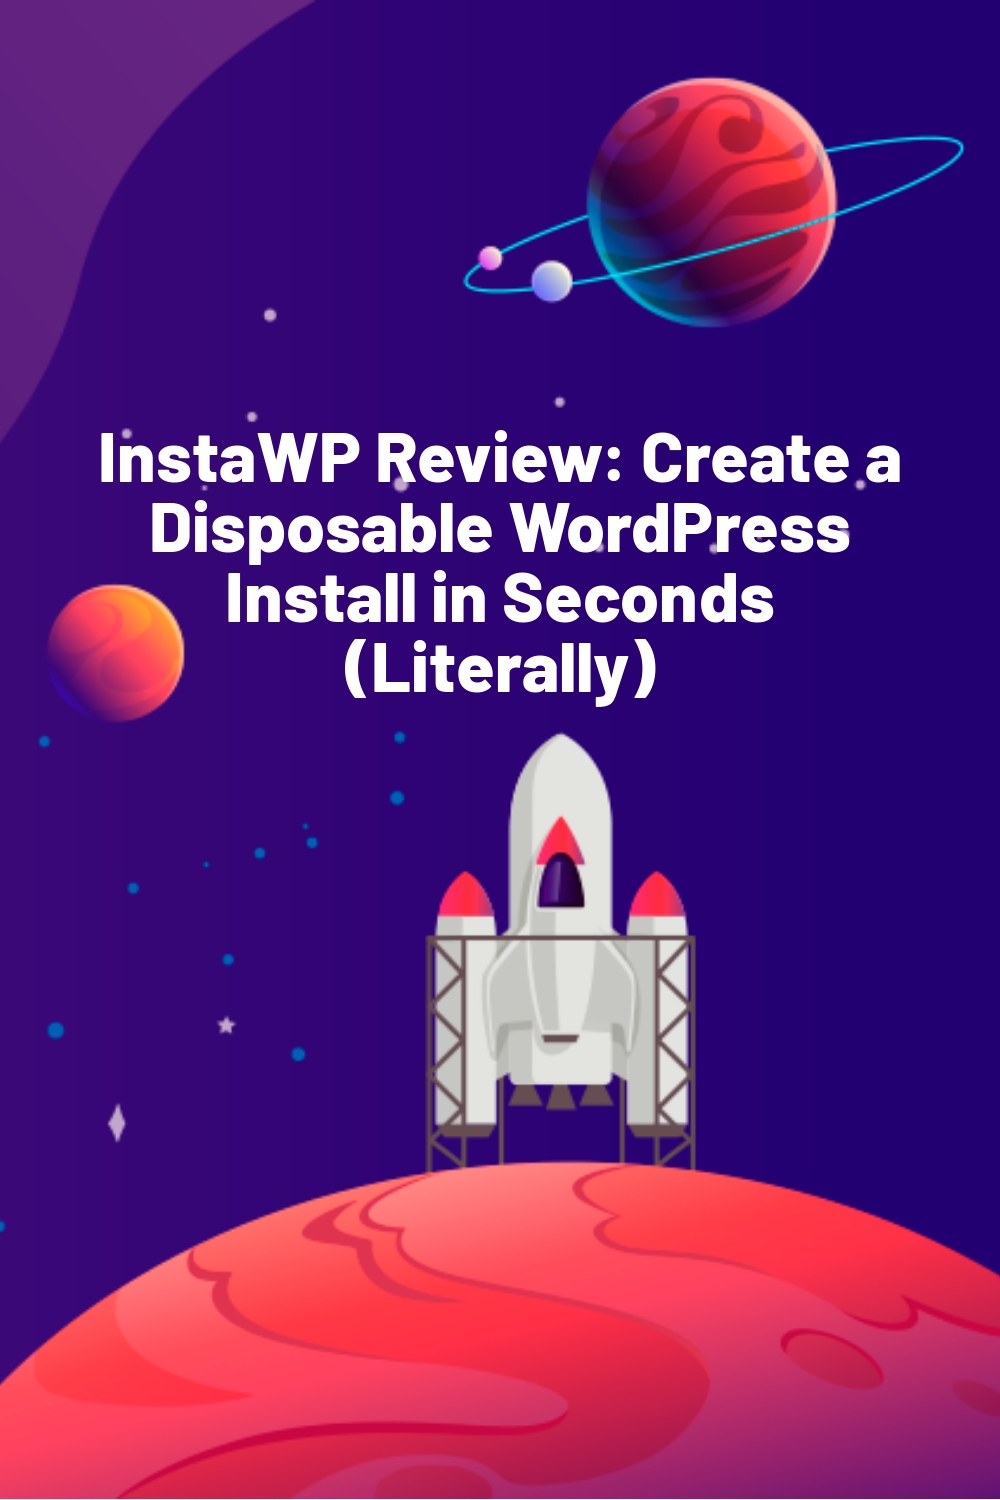 InstaWP Review: Create a Disposable WordPress Install in Seconds (Literally)